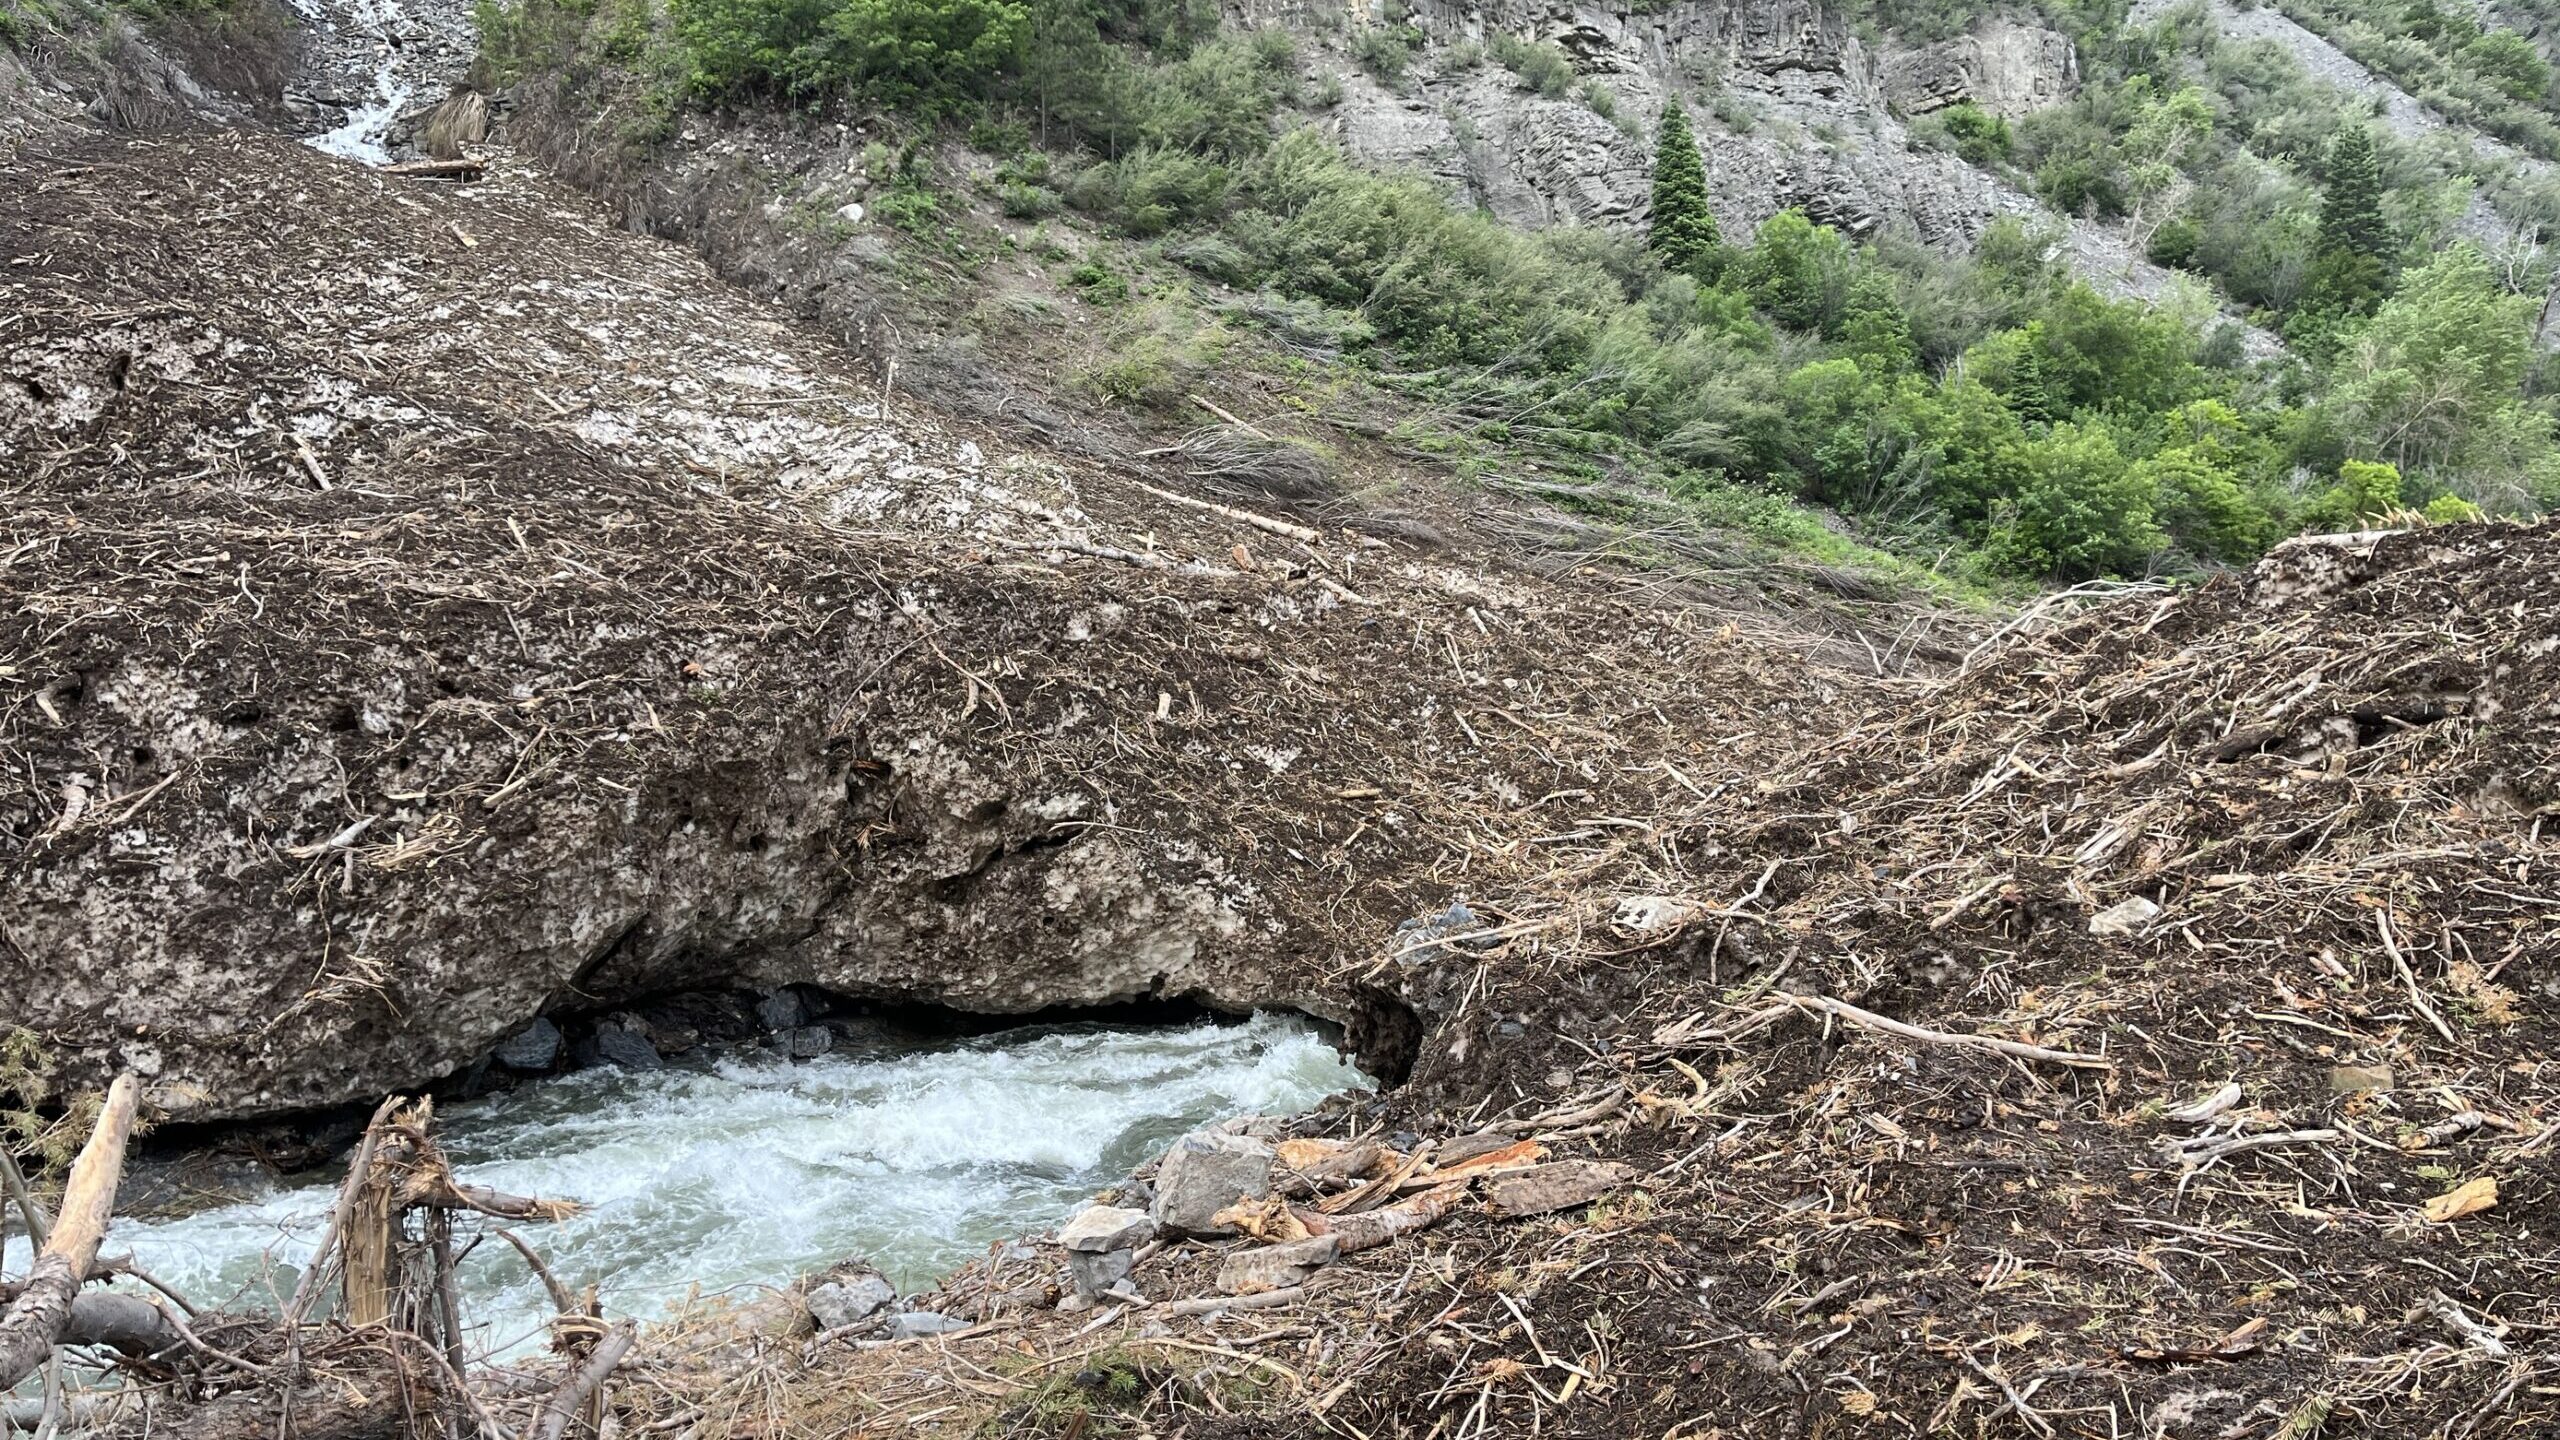 avalanche debris field pictured at bridal veil falls in provo canyon...